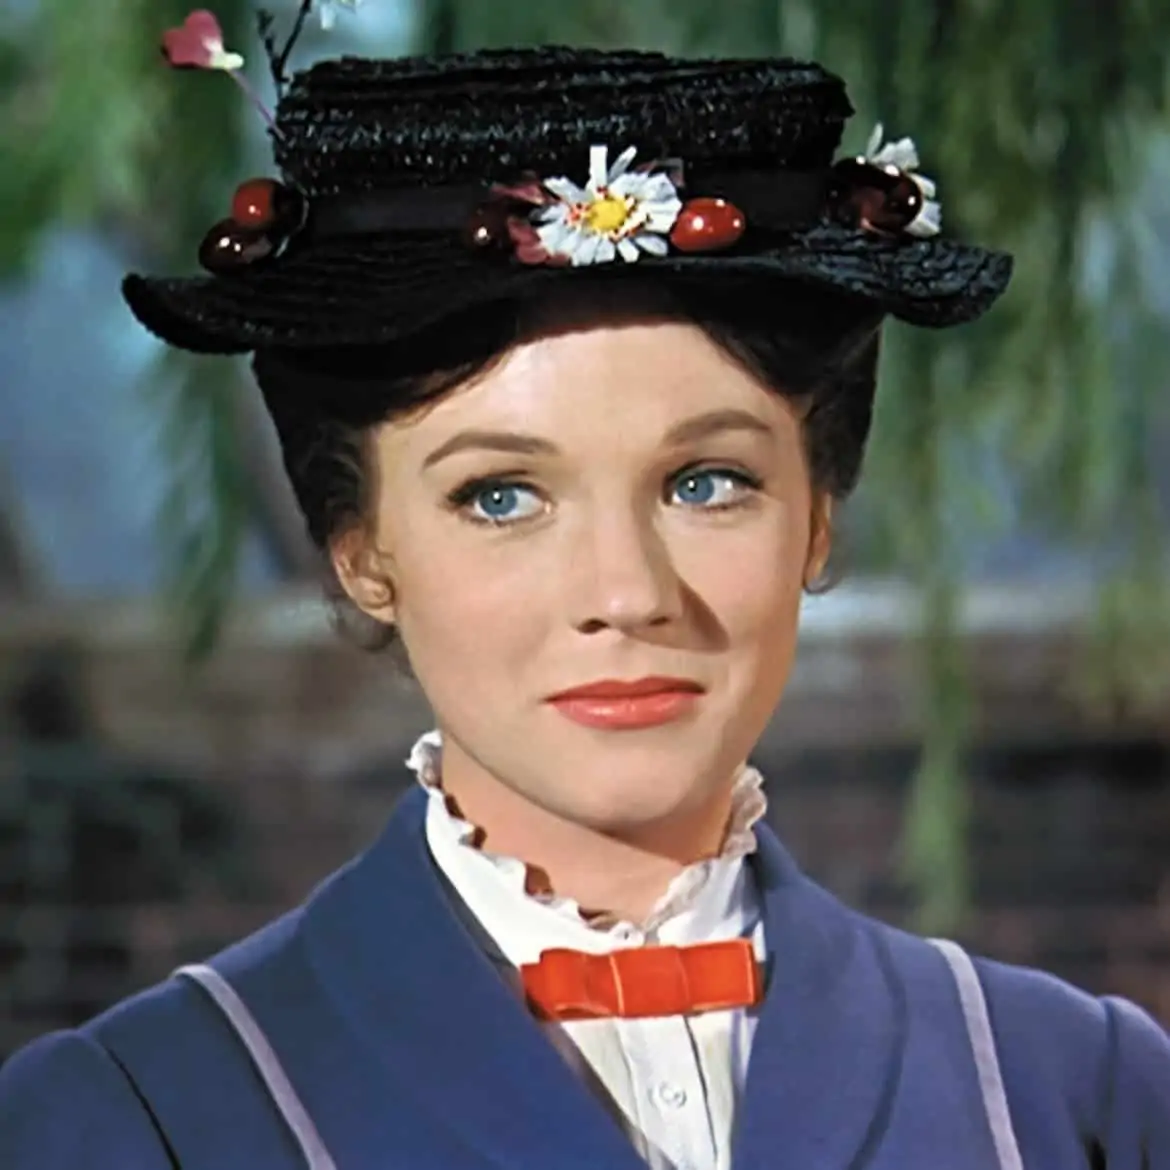 How To Make An Awesome DIY Mary Poppins Costume